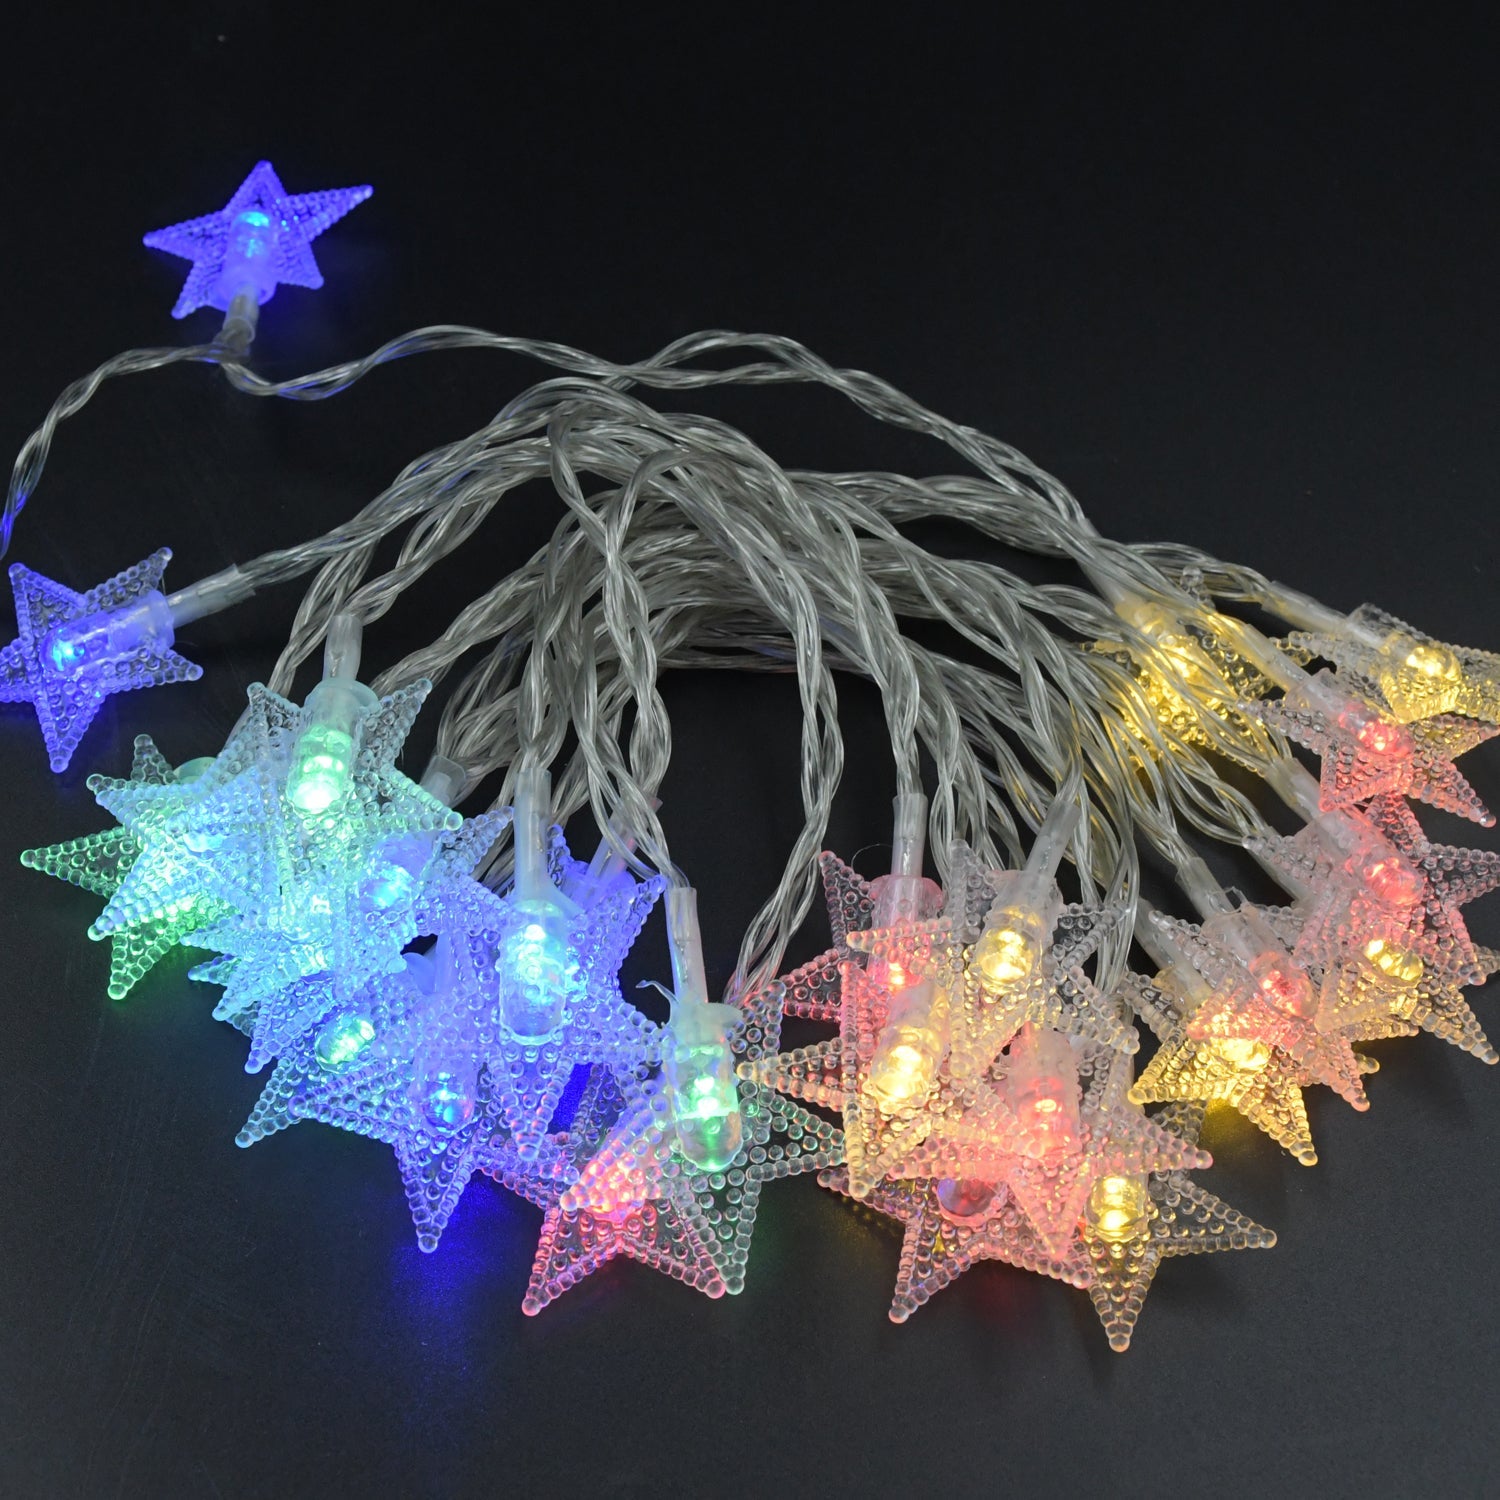 6603  28 LED / Star 3.9 Meter Star Shape Led Light Battery Operated with Flashing Modes for Home Decoration, Kids Room, Waterproof Diwali & Wedding LED Christmas Light Indoor and Outdoor Light ,Festival Decoration (Multicolor Battery Not Included 3.9Mtr)